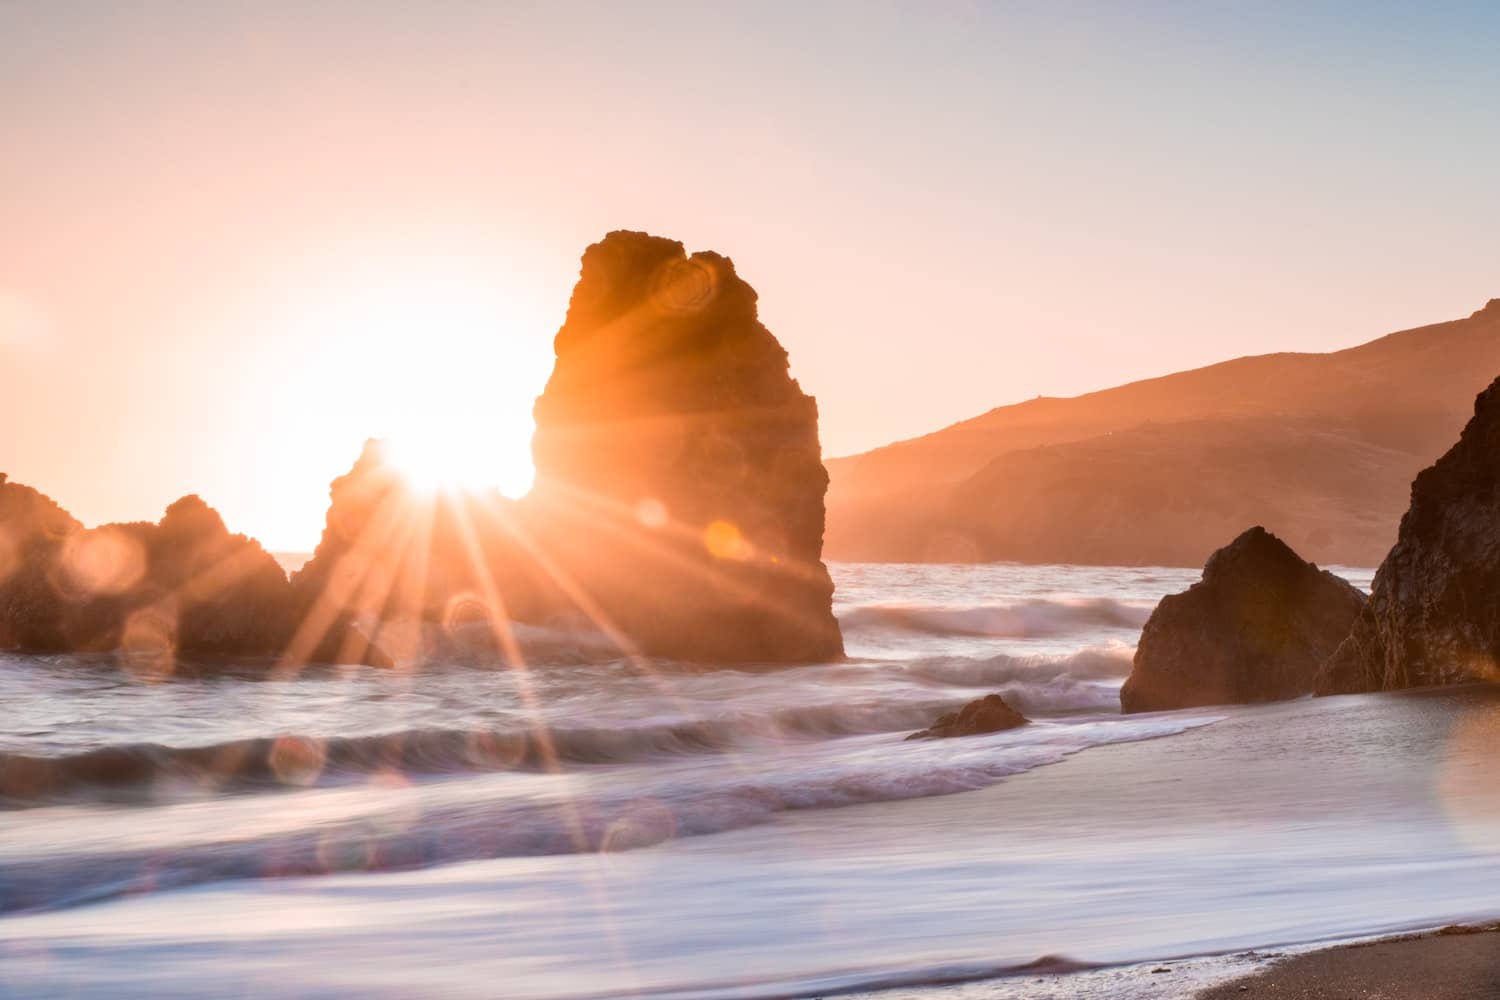 Sun stars make for magical subjects in your beach photography, try to capture them with these tips.